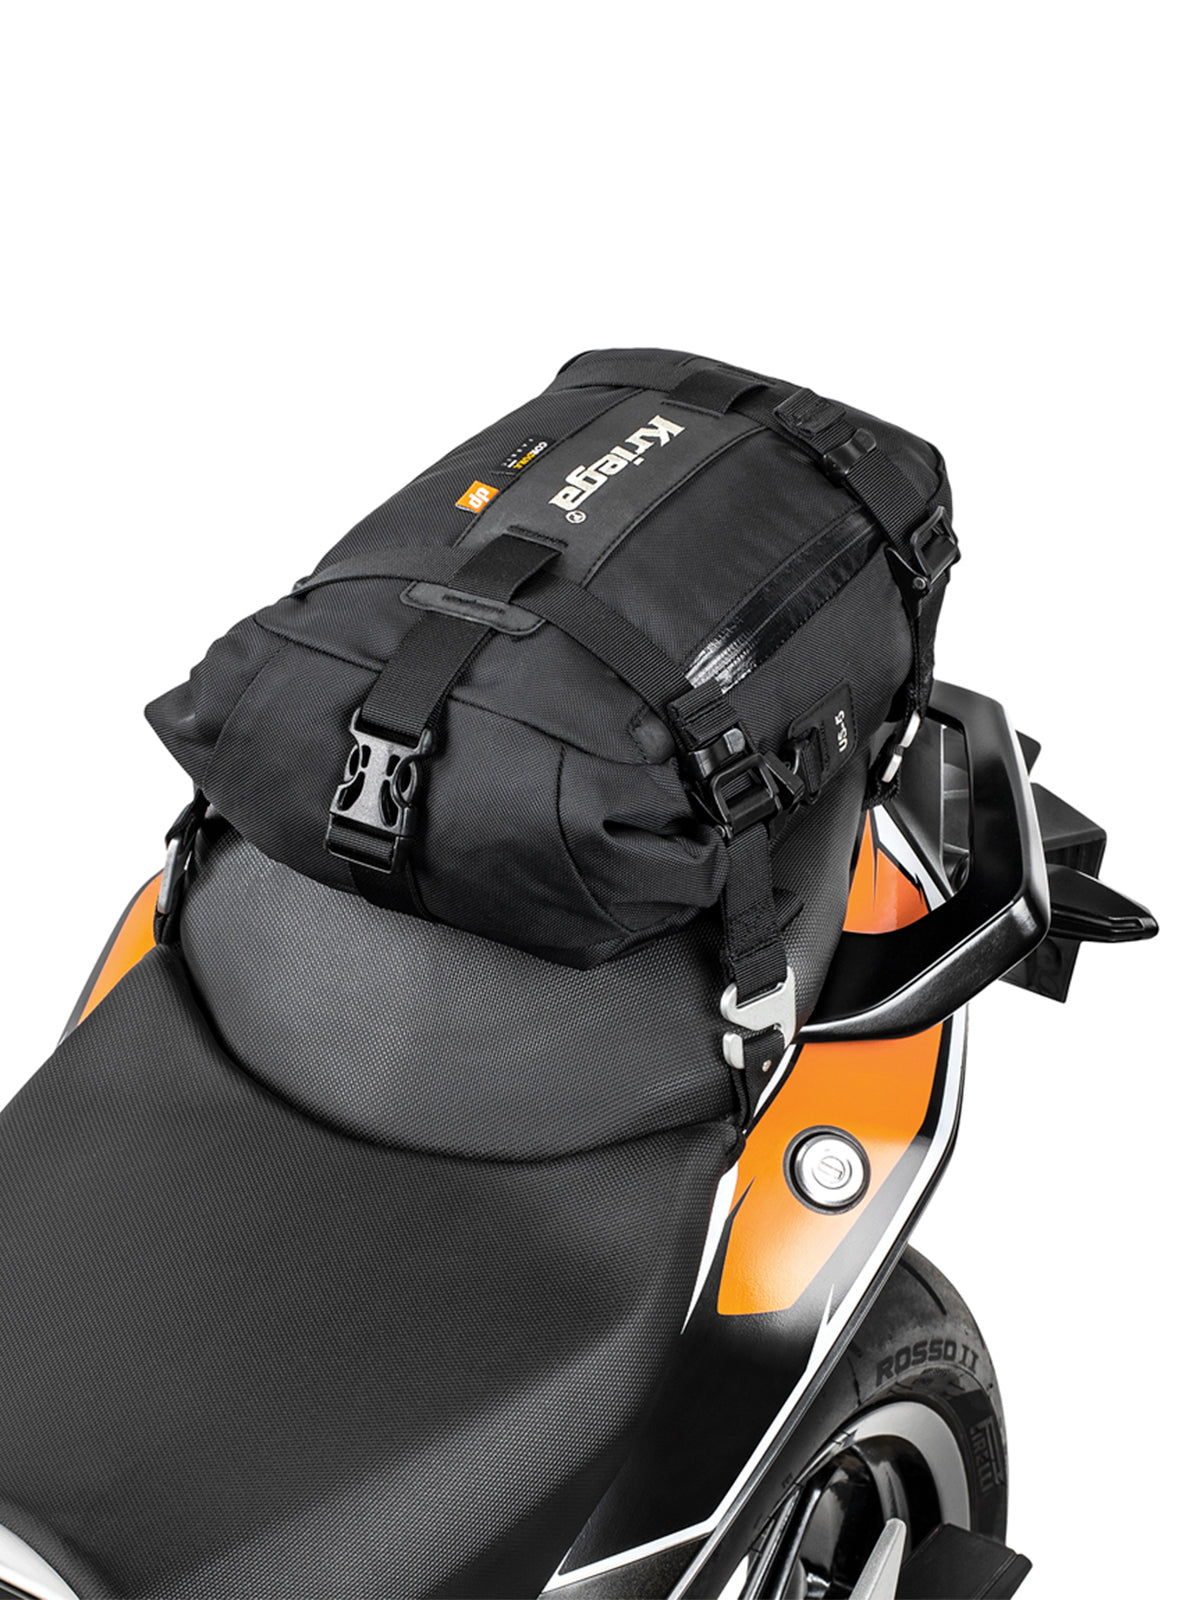 Kriega US5 Drypack fitted to rear of ktm